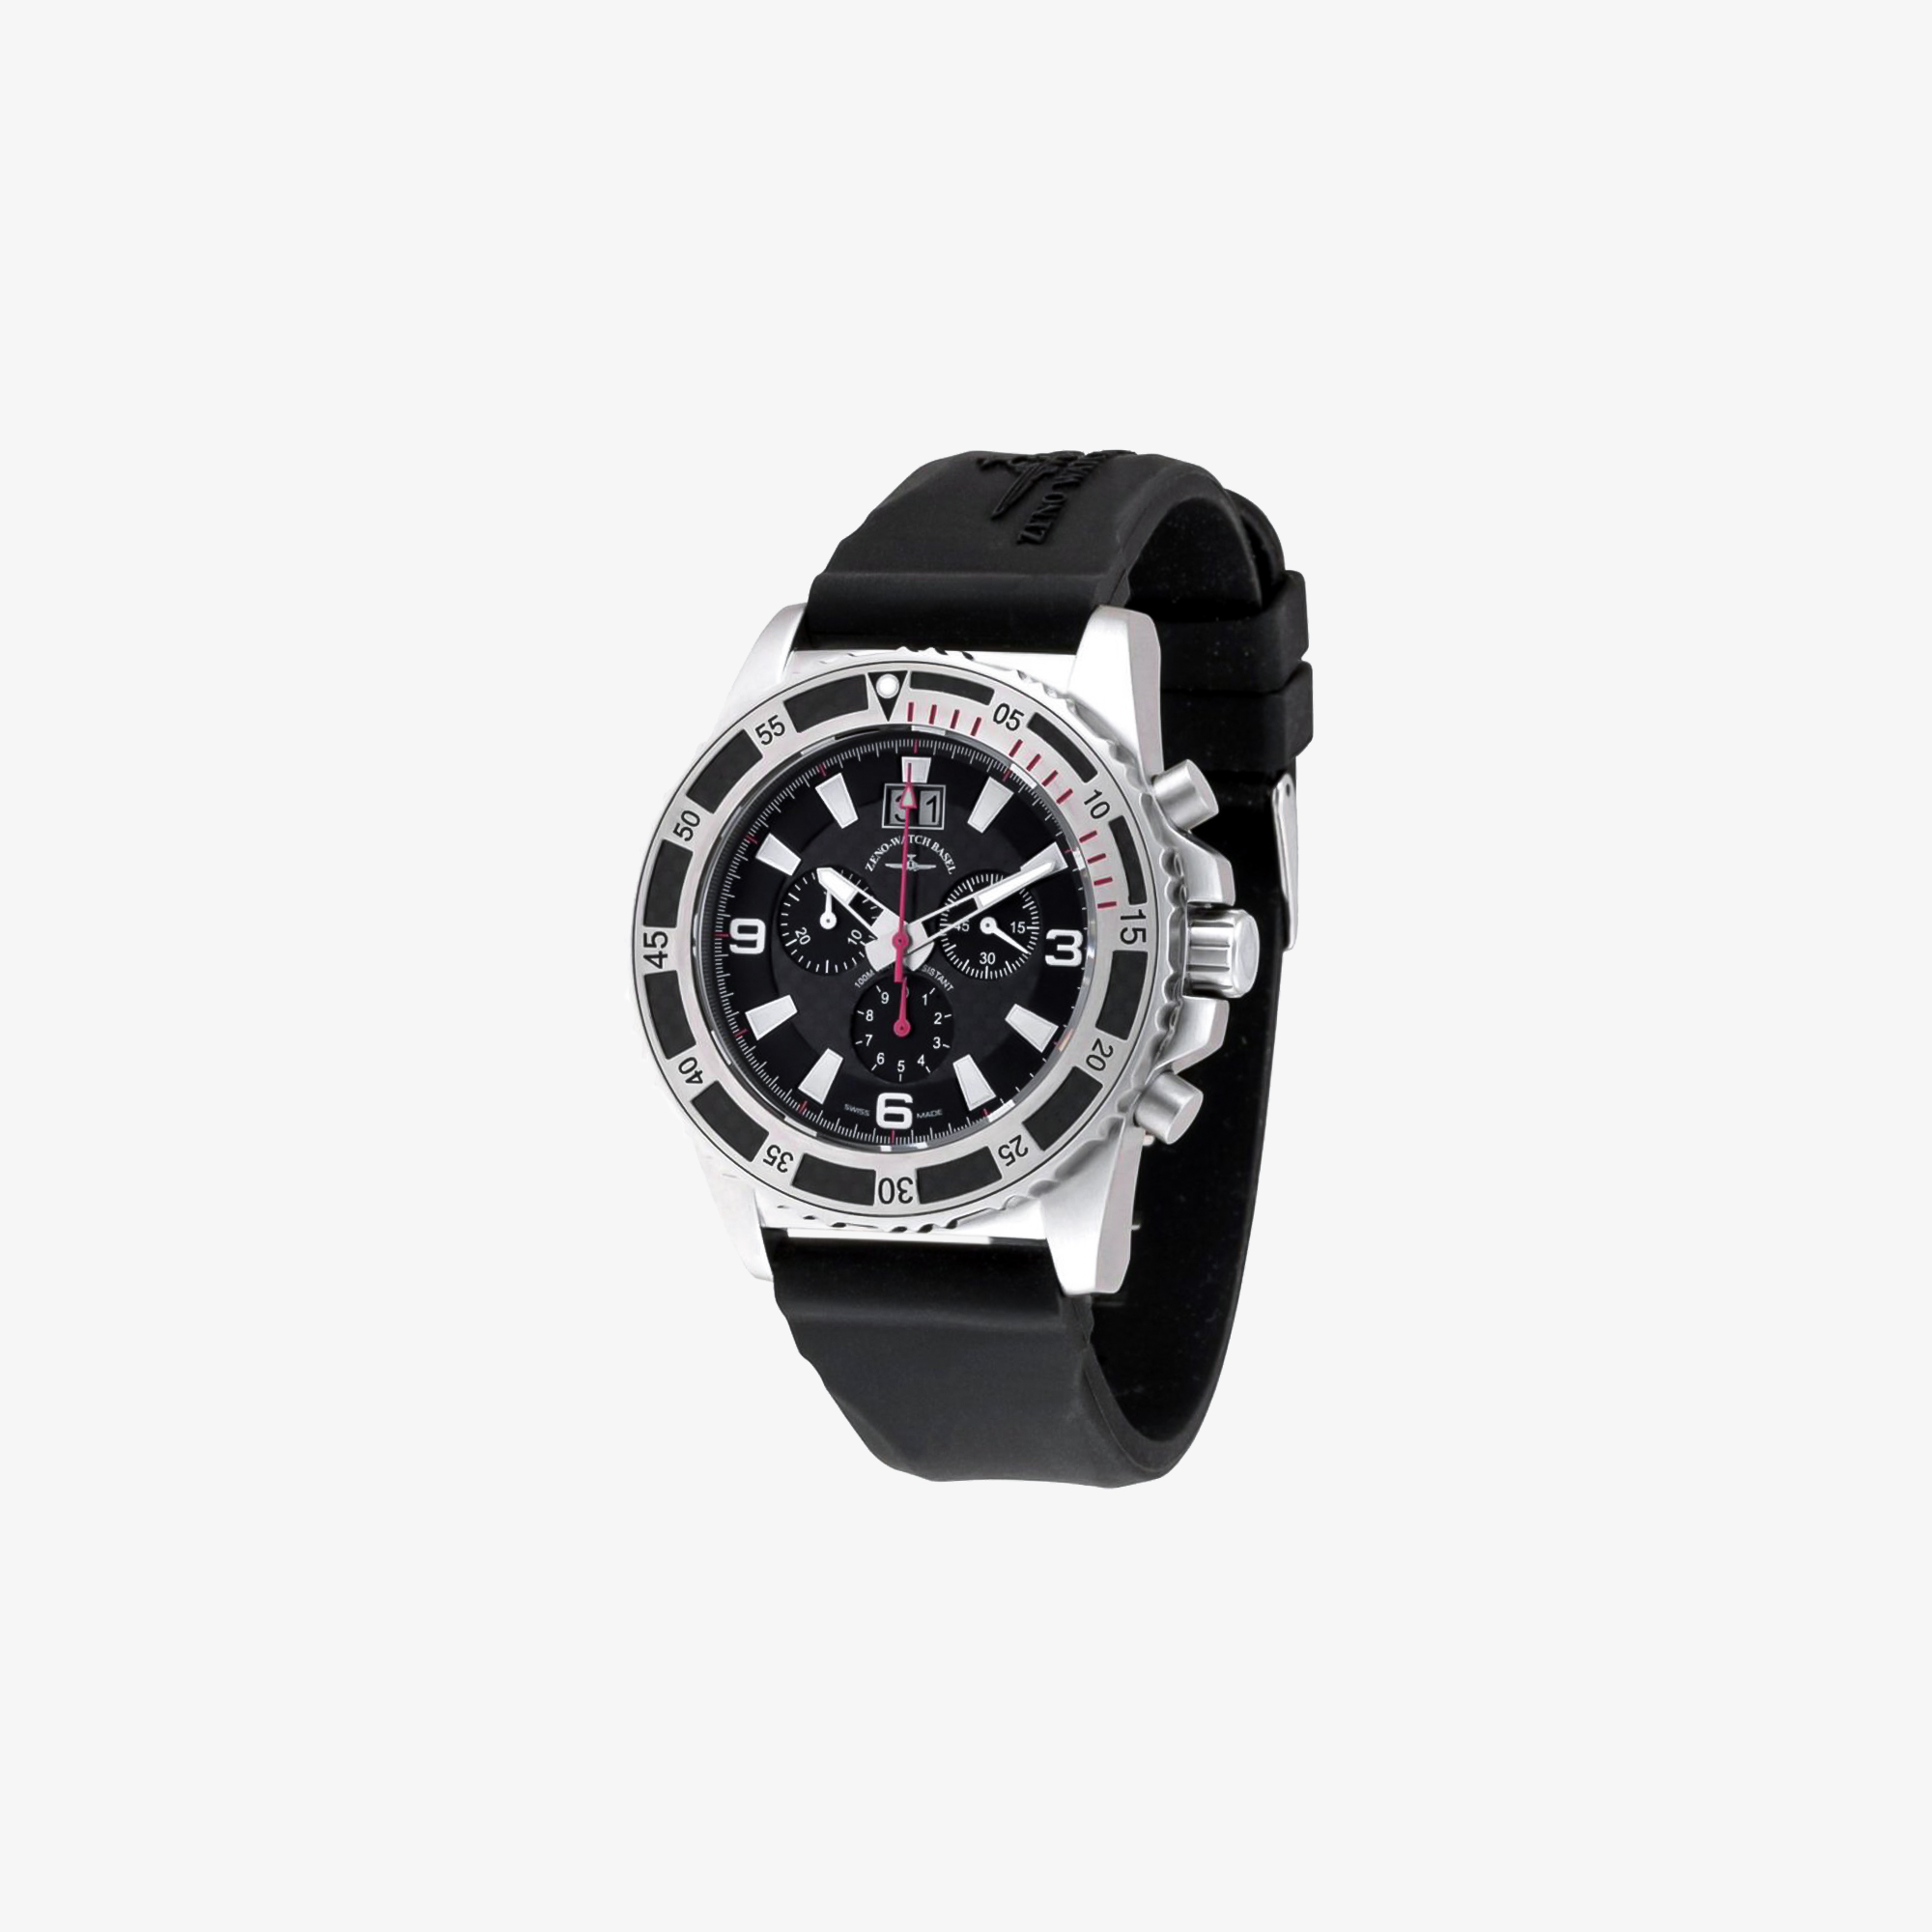 ZENO-WATCH BASEL,PD-Look Chronograph Q Big Date black+red